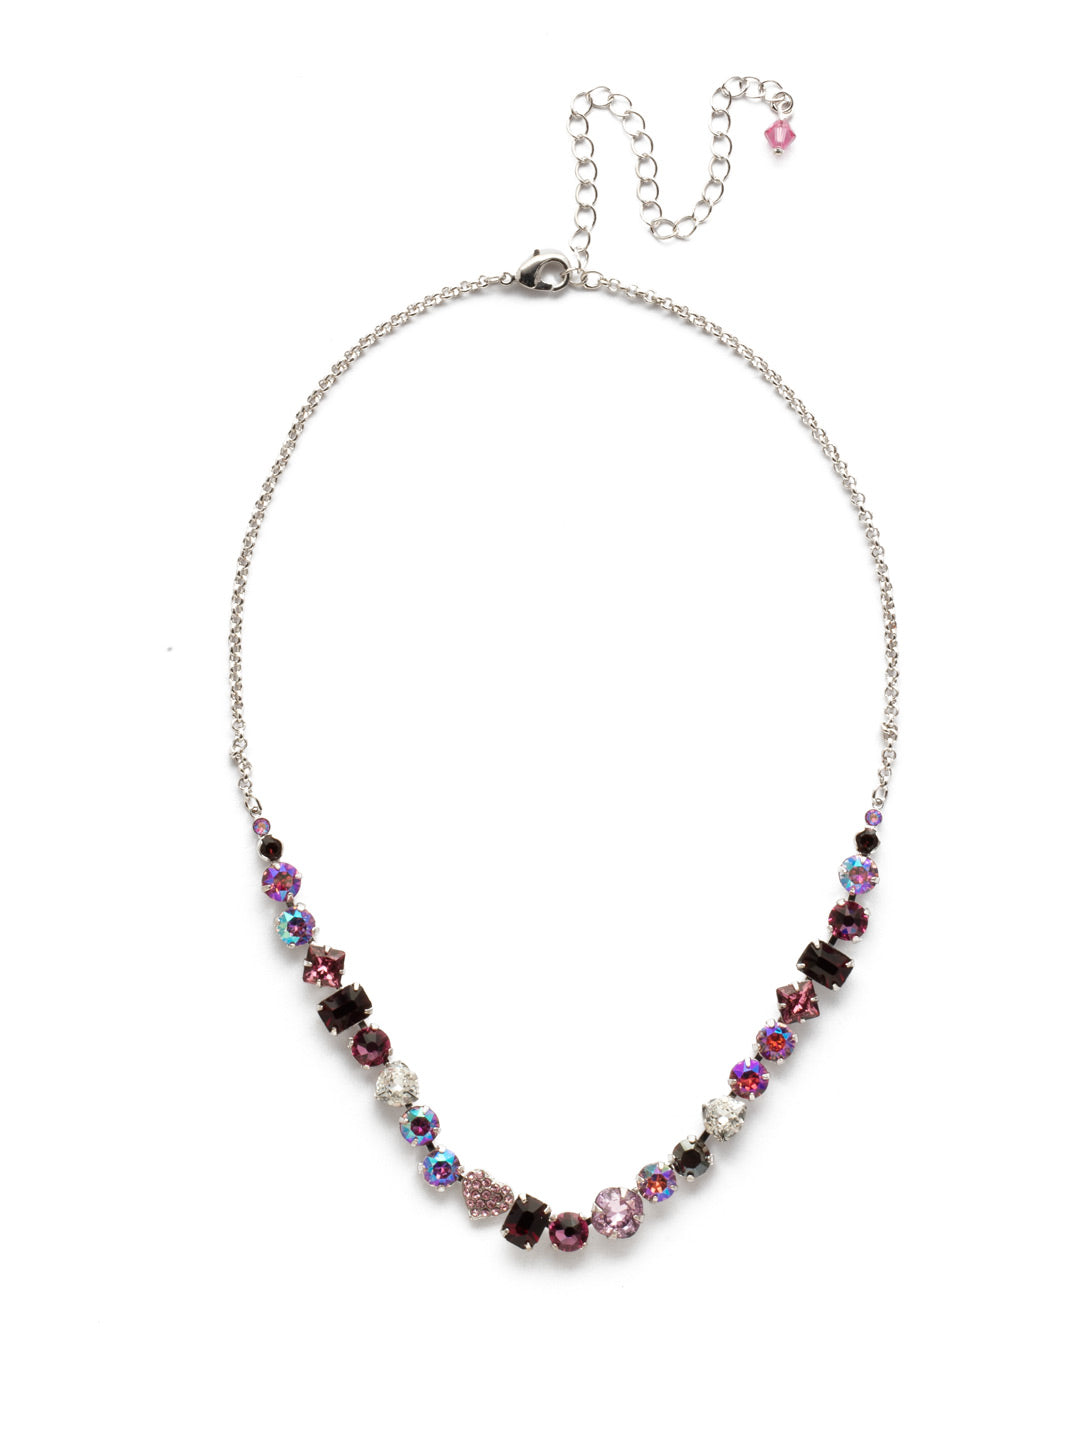 Seraphina Tennis Necklace - NEM9RHAB - <p>Shine bright in this necklace, which features statement hearts of crystal gems. From Sorrelli's Apple Blossom collection in our Palladium Silver-tone finish.</p>